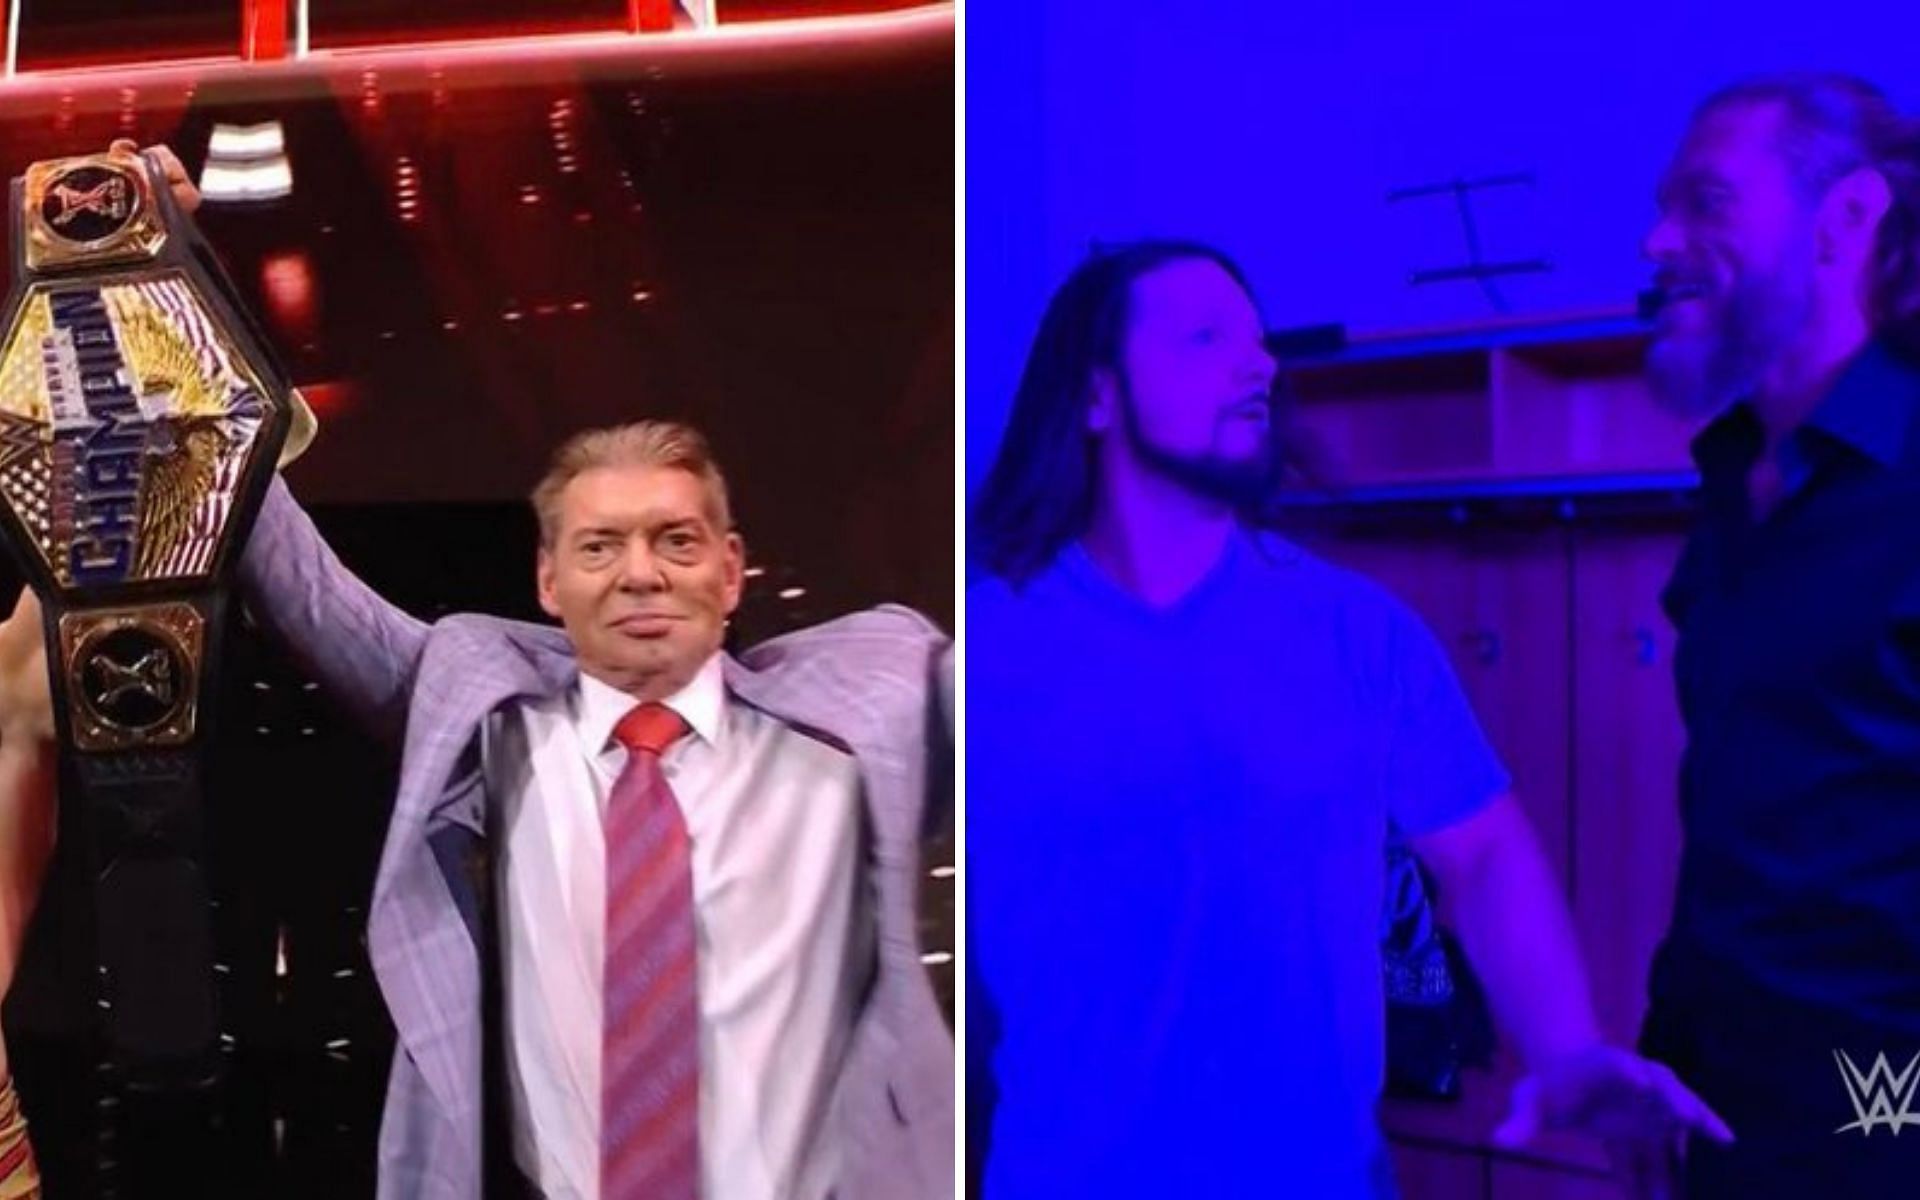 Vince McMahon (left); AJ Styles and Edge (right)